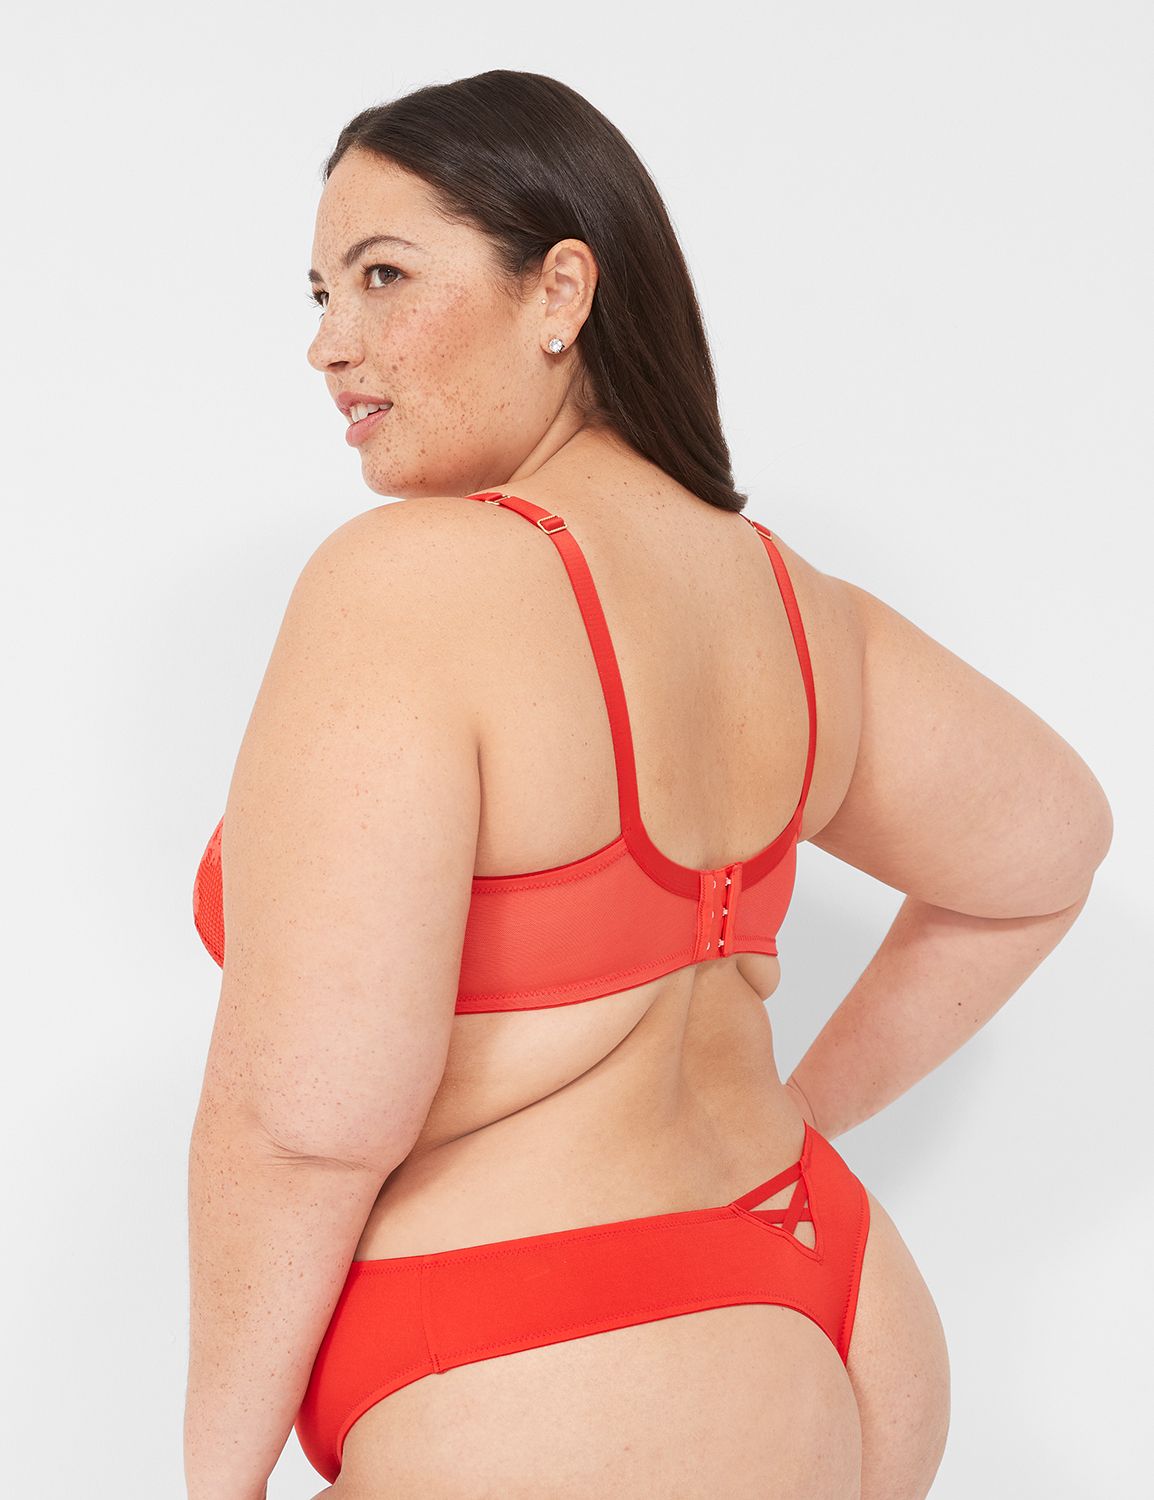 Red Plus Size Sexy Lingerie